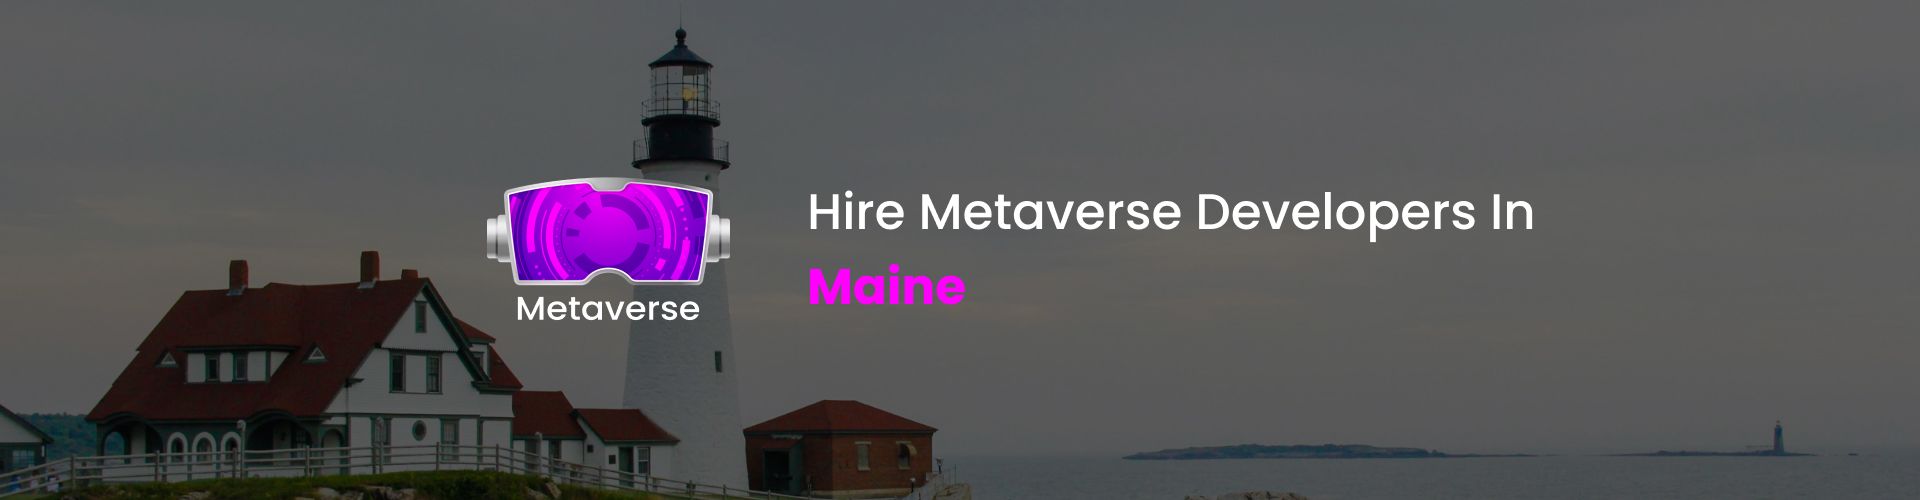 hire metaverse developers in maine